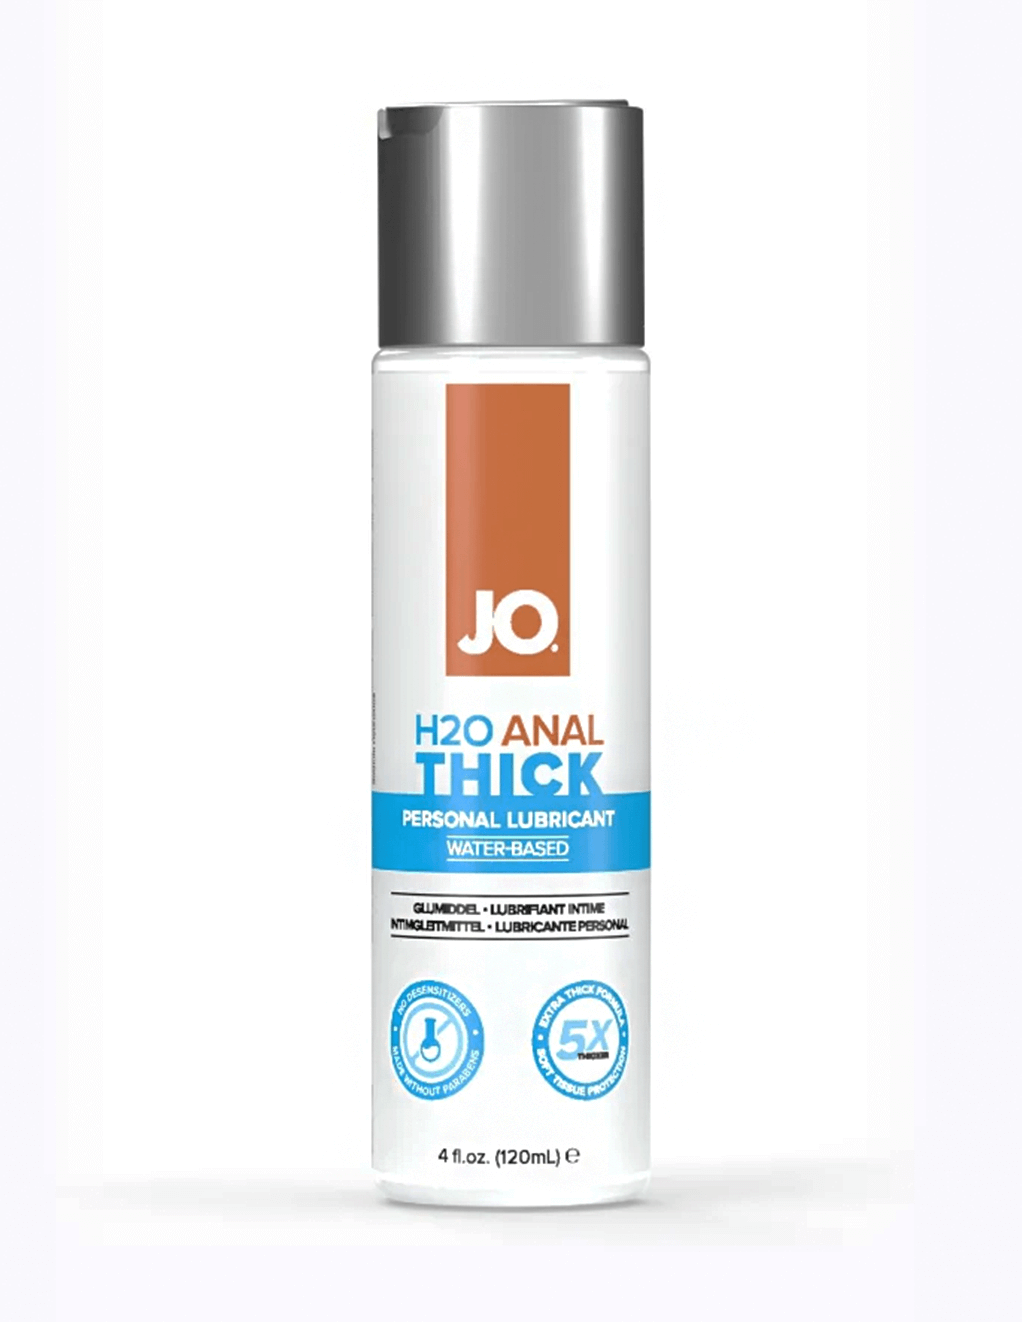 Jo H2O Anal Thick Water Based Lubricant - 4oz - Main